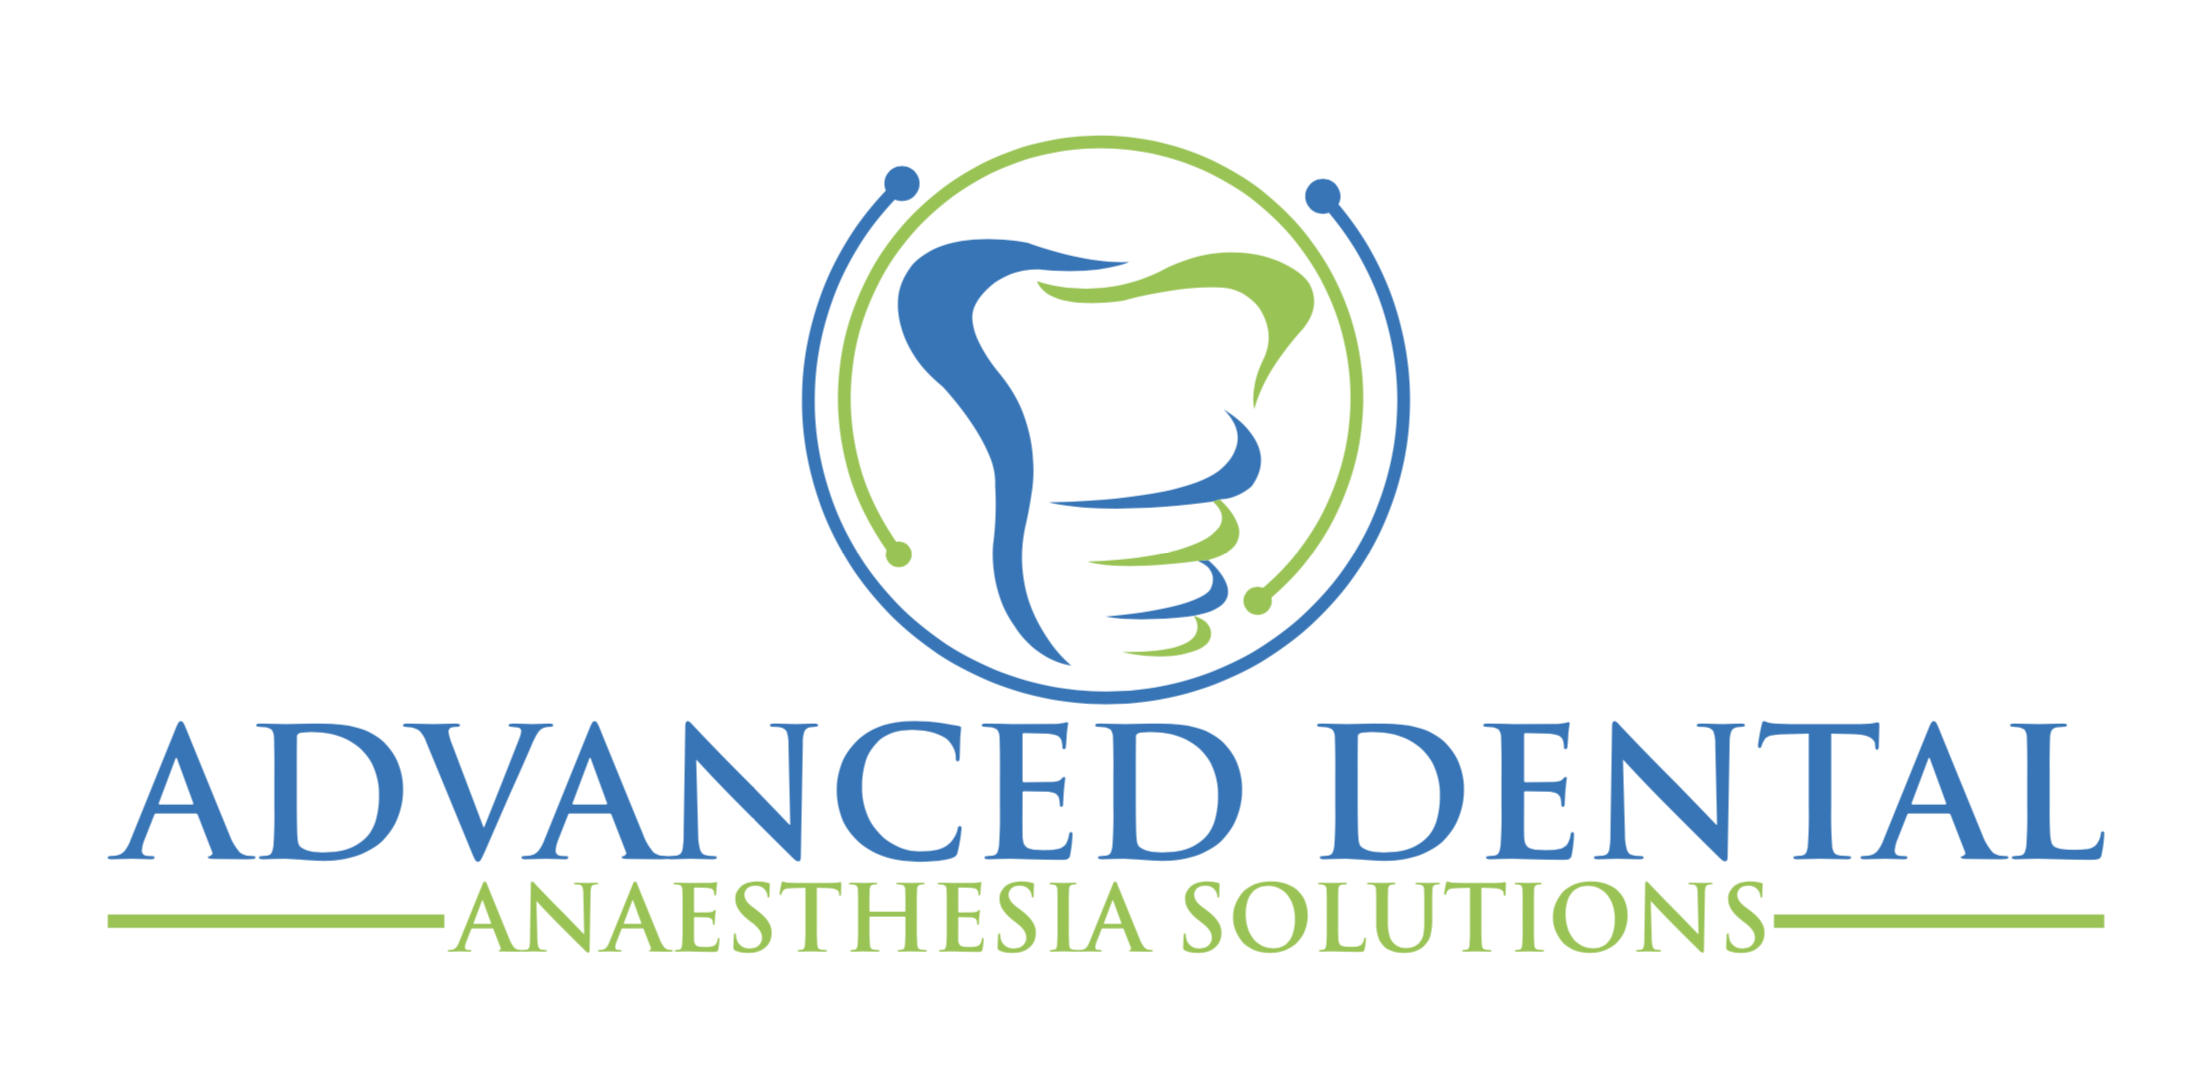 Advanced Dental Anaesthesia Solutions